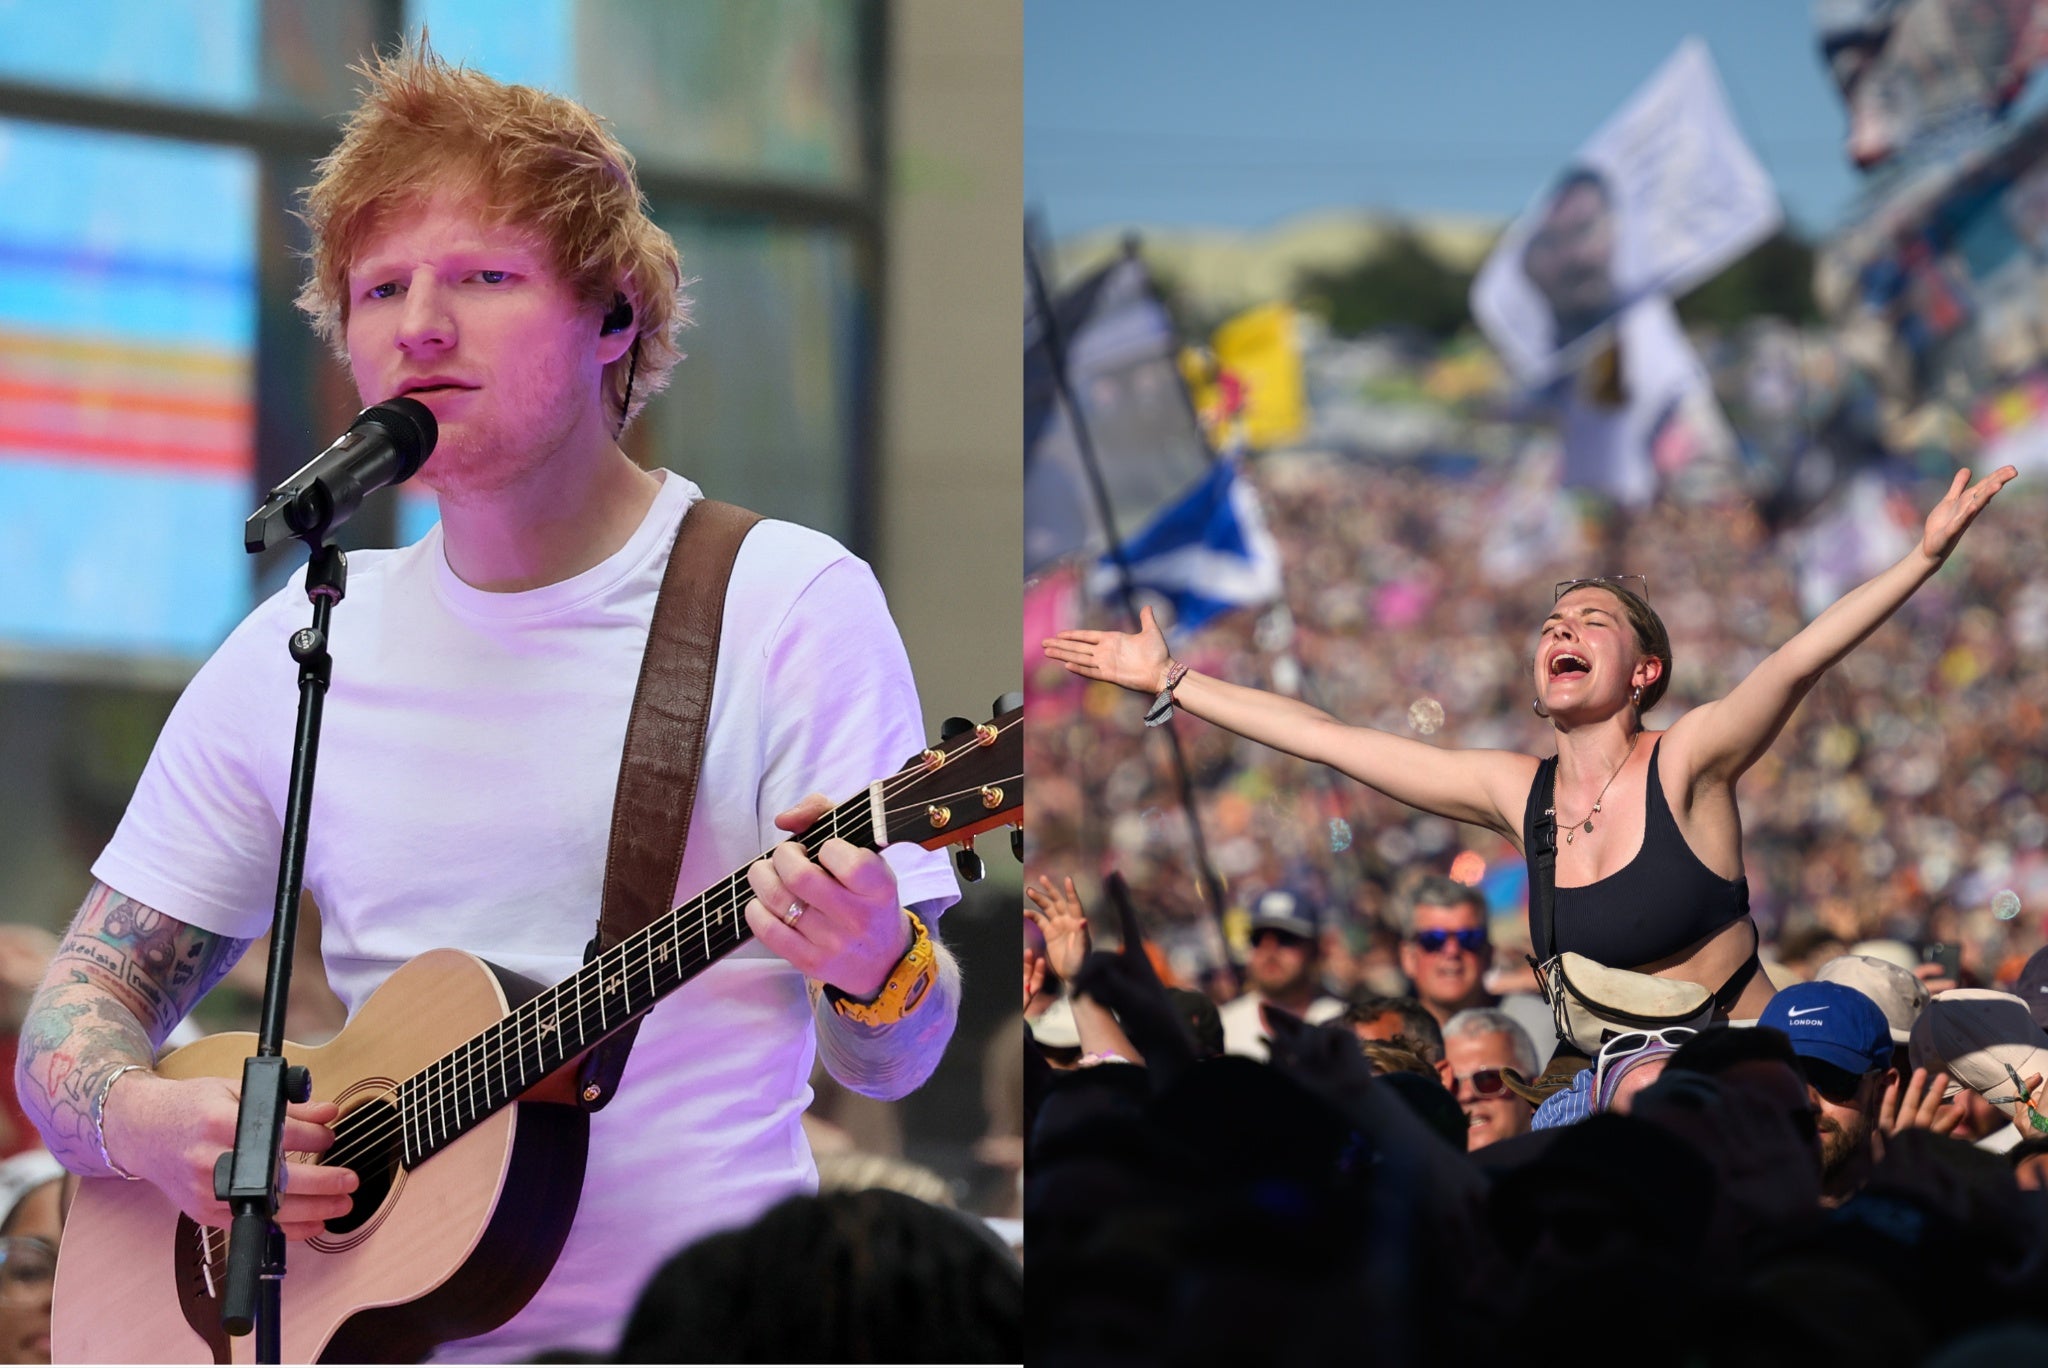 Ed Sheeran started out playing many of the UK’s grassroots music venues, many of which now face permanent closure